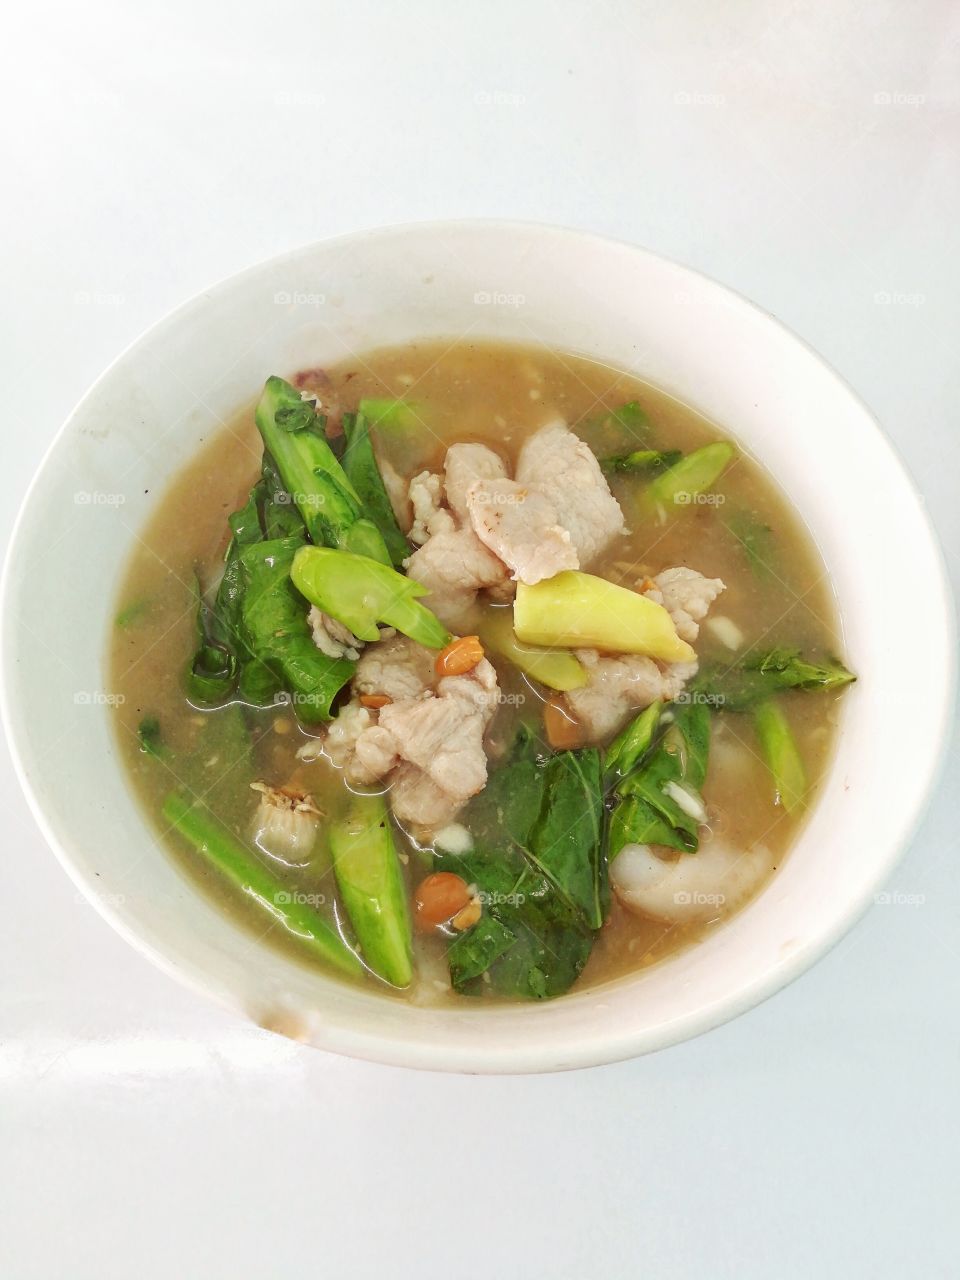 Fried noodles soup with pork and broccoli.